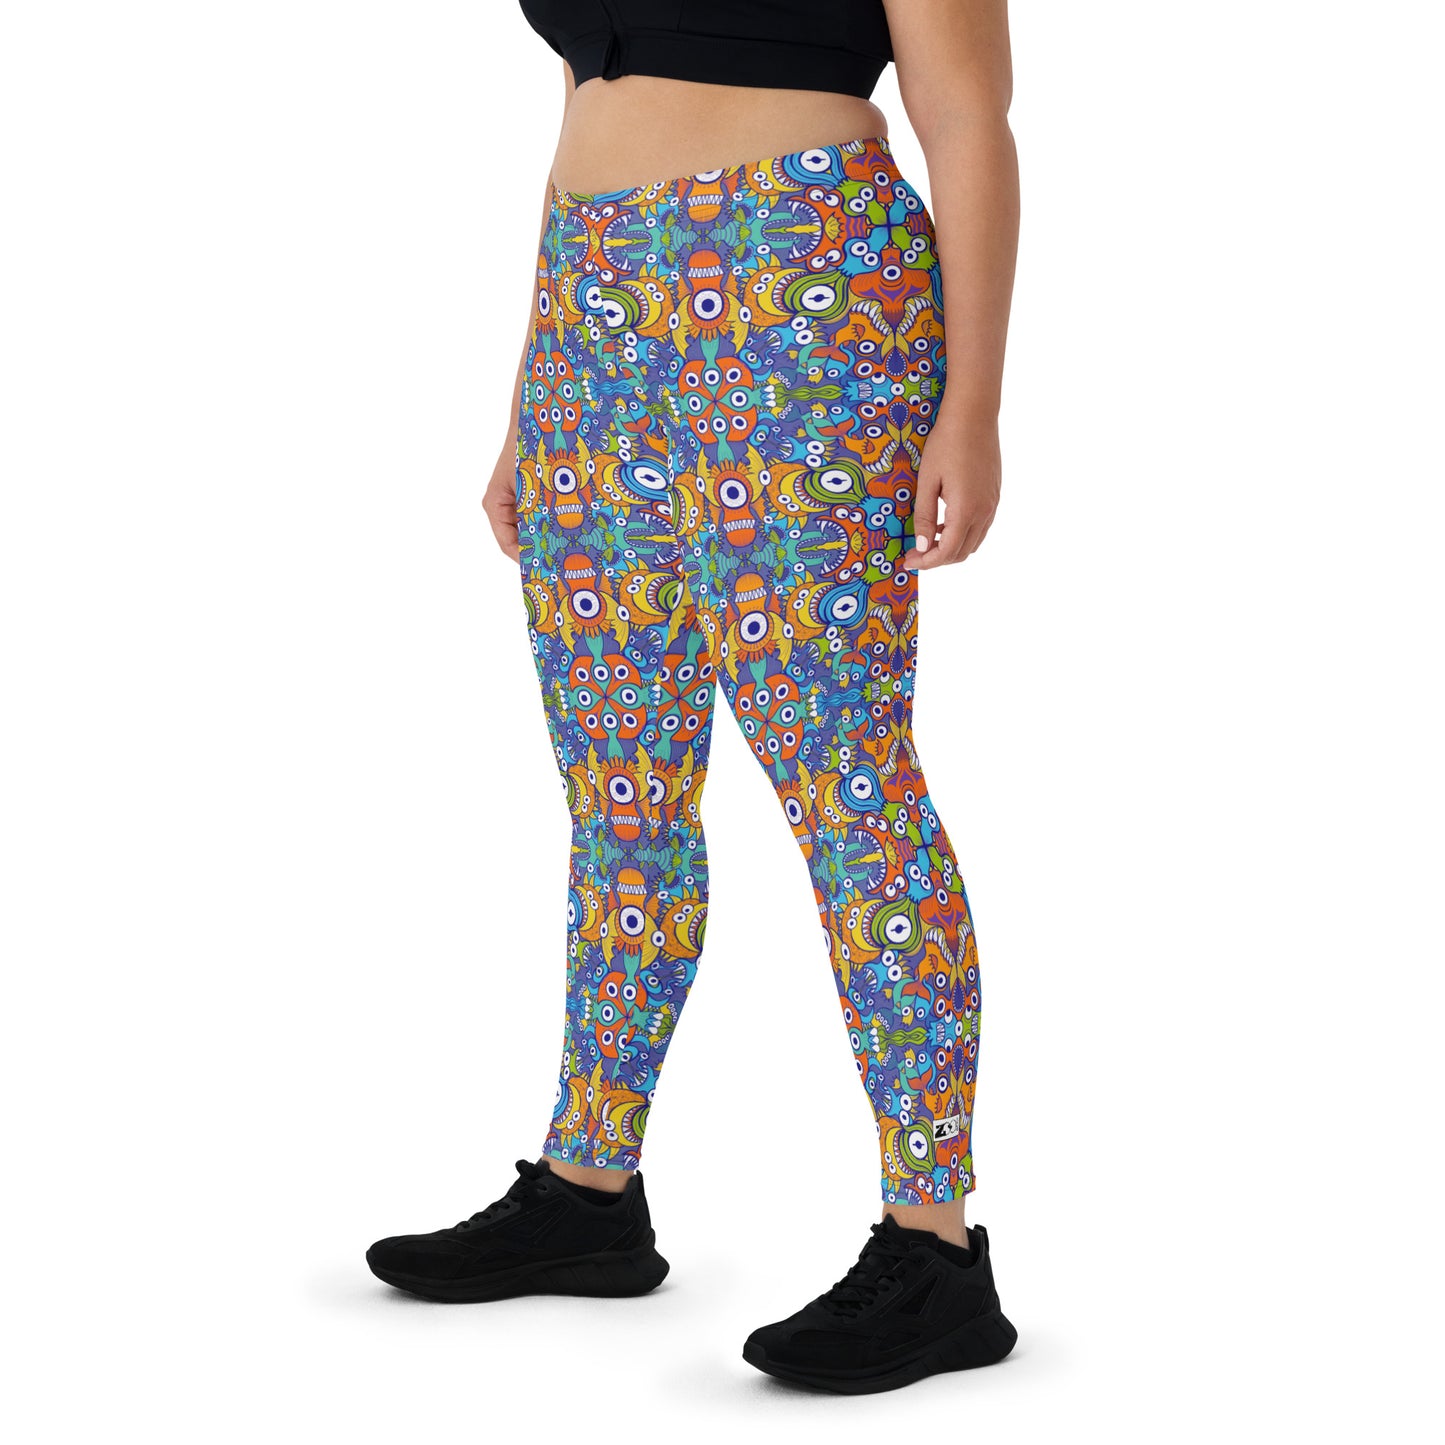 Kaleidoscope of Whimsy: A Vivid Dream in Design - Leggings. Front view